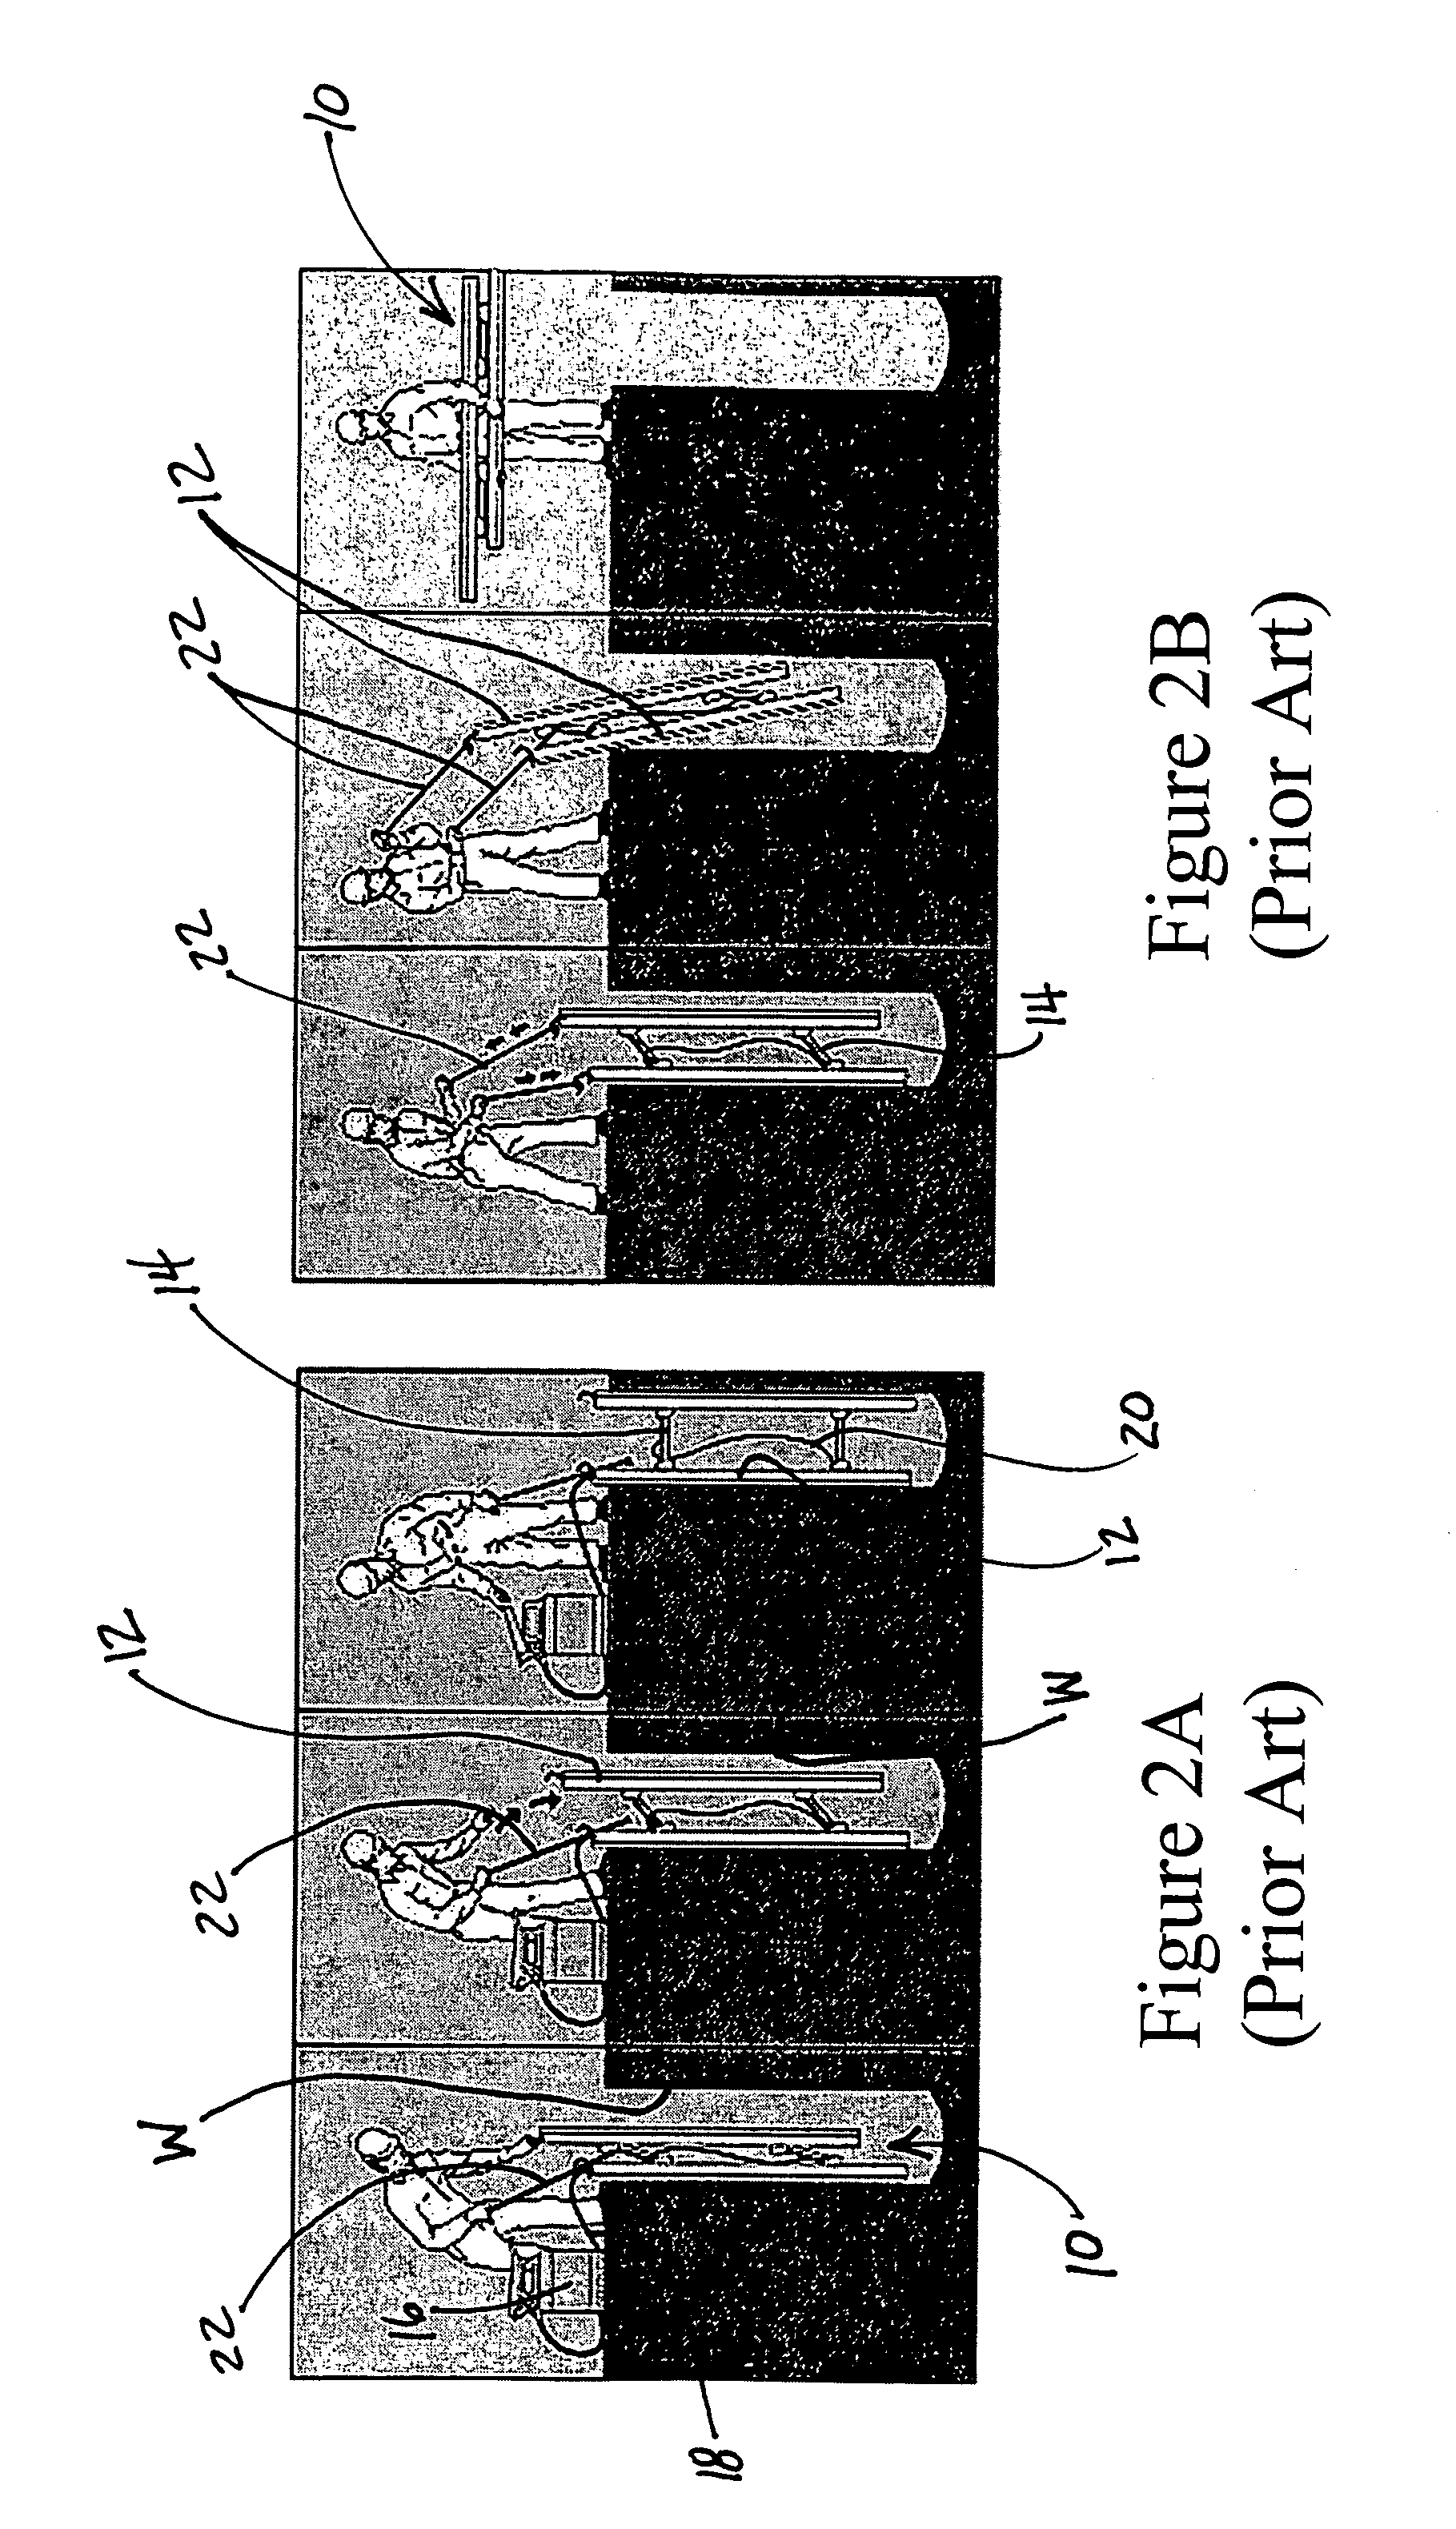 Shoring assembly and method